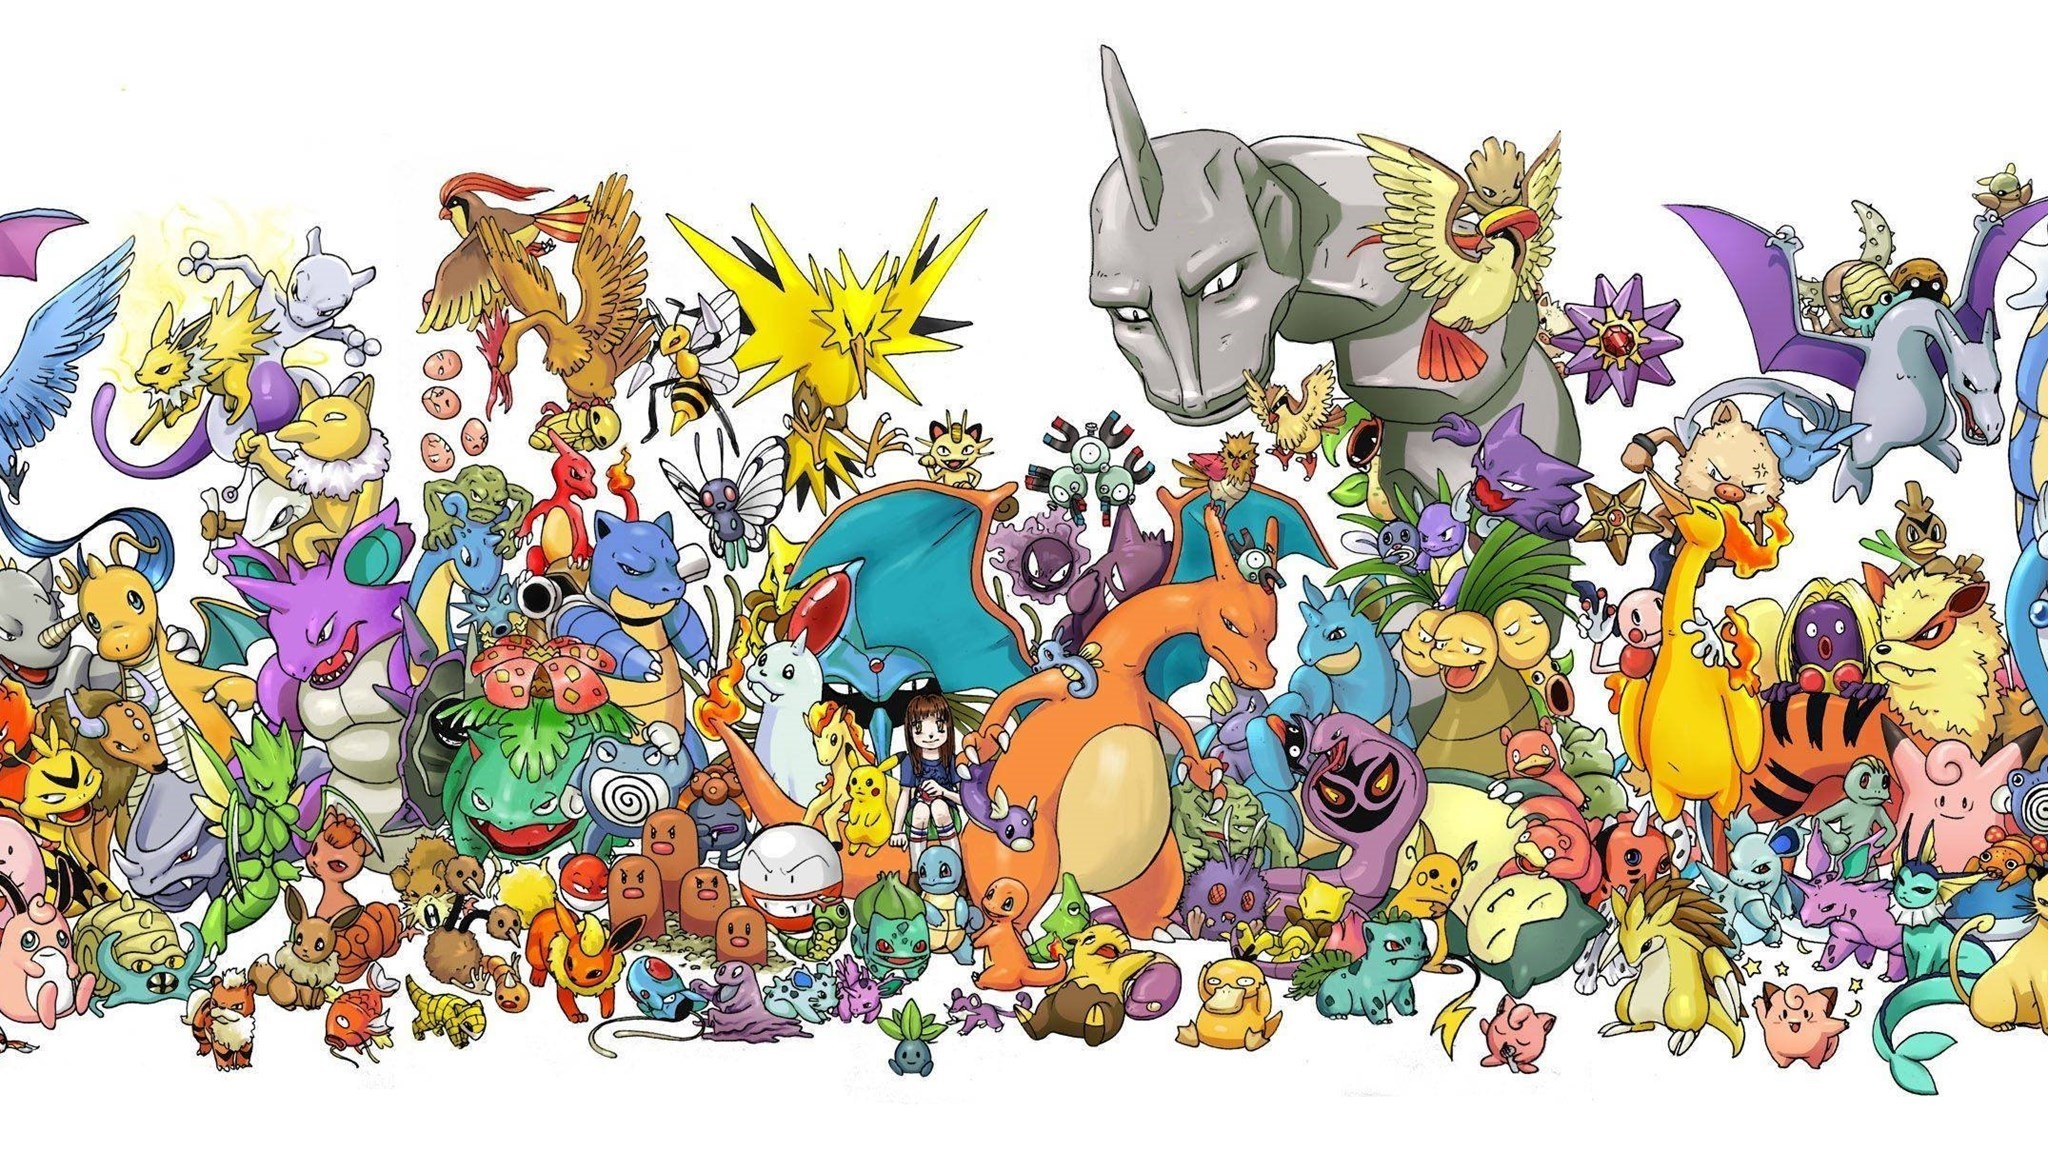 2048x1152 Download All Pokemon Background Free Awesome Pokemon Wallpapers Free  Desktop Background Of Download All Pokemon Background